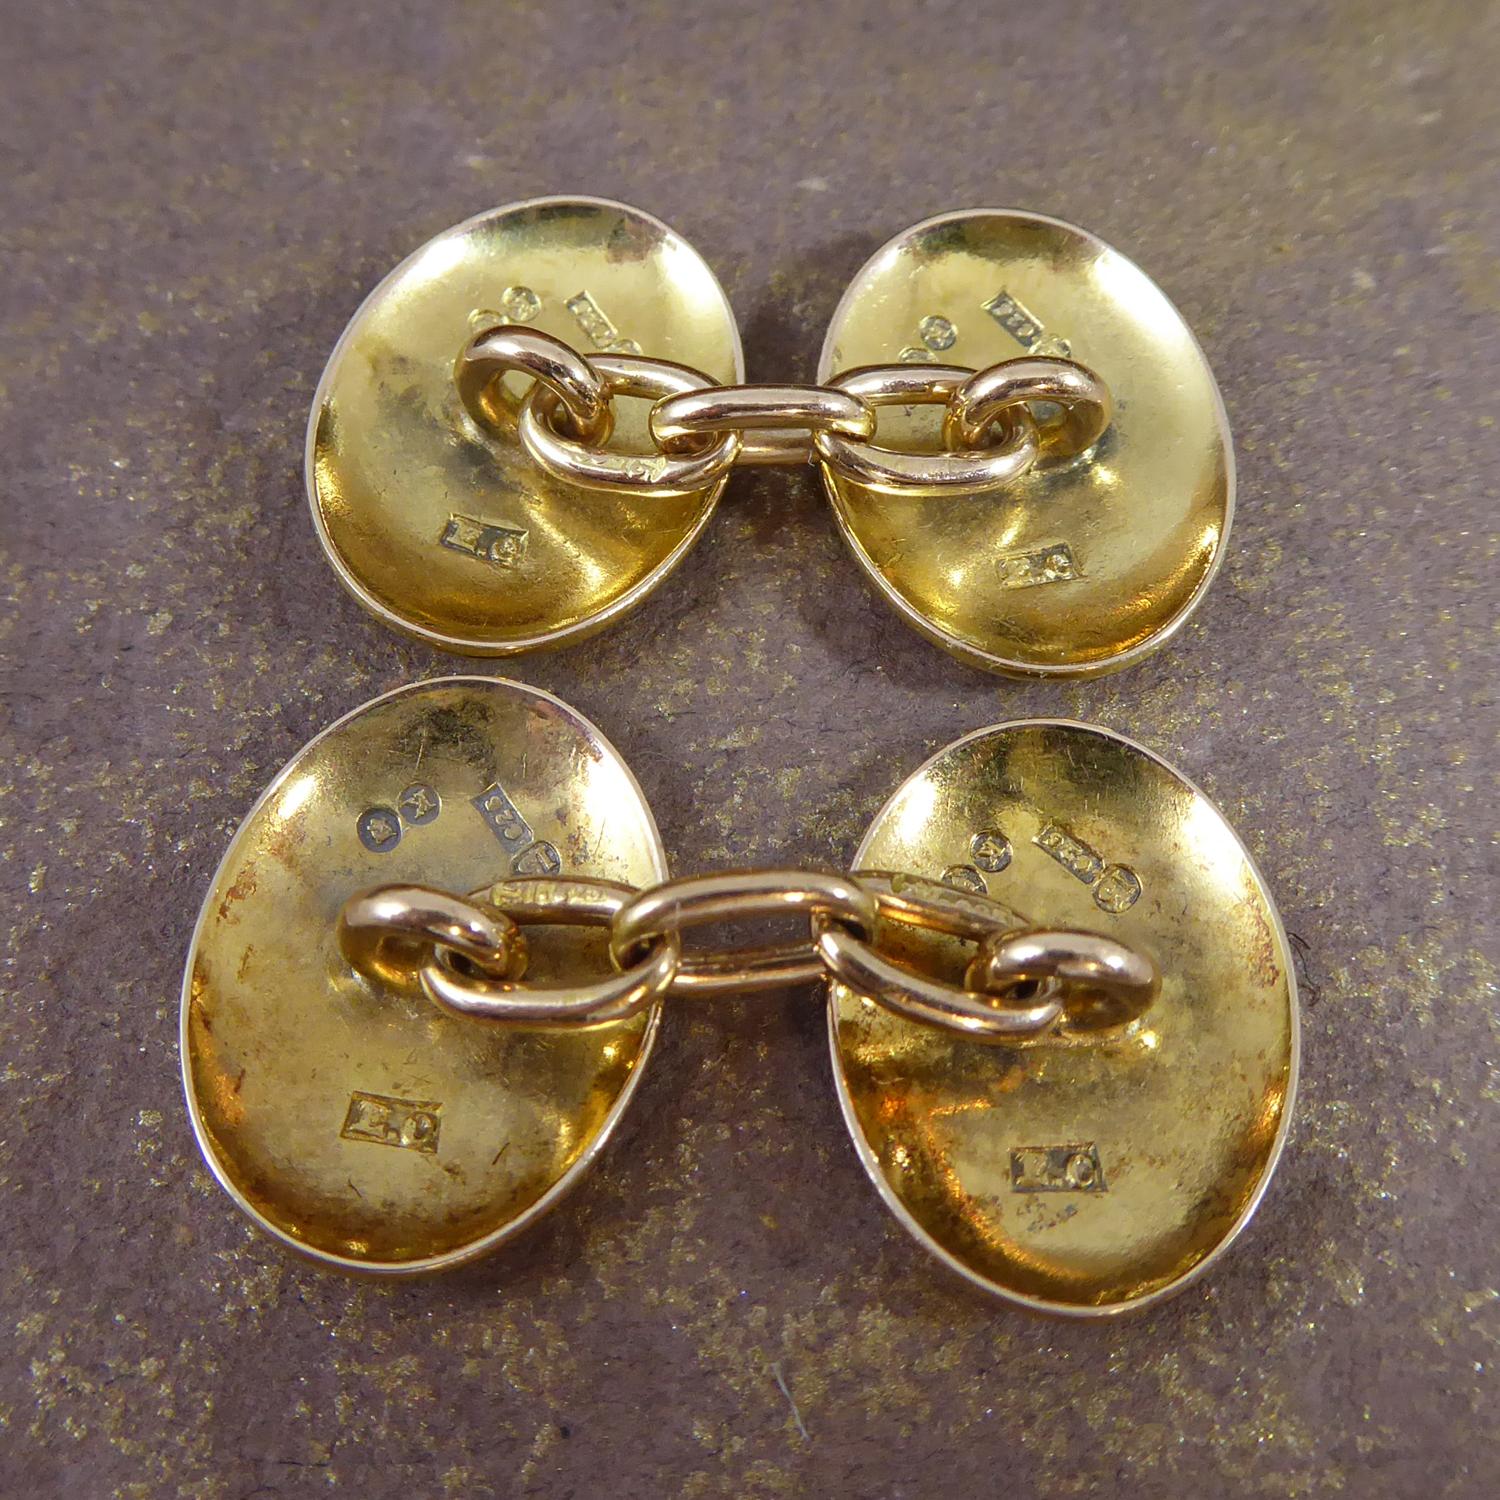 Victorian cufflinks crafted in 15ct gold in London 1885.  The cufflinks are extravagantly hand engraved with a floral pattern to both sides of the cufflink.  Connected by oval gold chain stamped with the marks for 15ct gold.  Oval in shape and